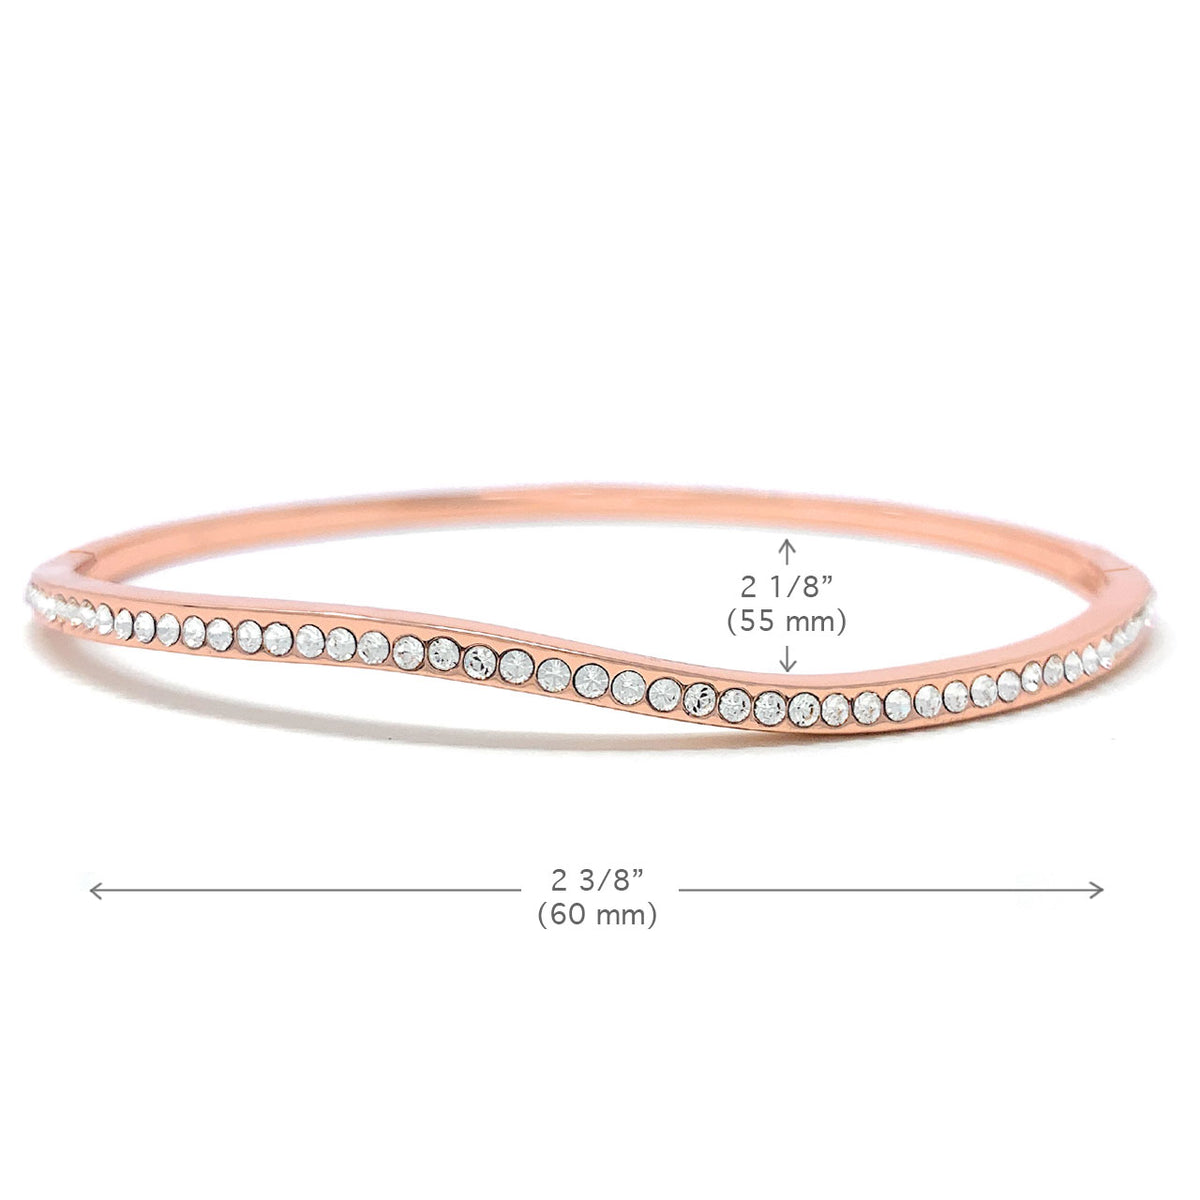 Amelia Curve Pave Bangle Bracelet with White Clear Round Crystals from Swarovski Rose Gold Plated - Ed Heart